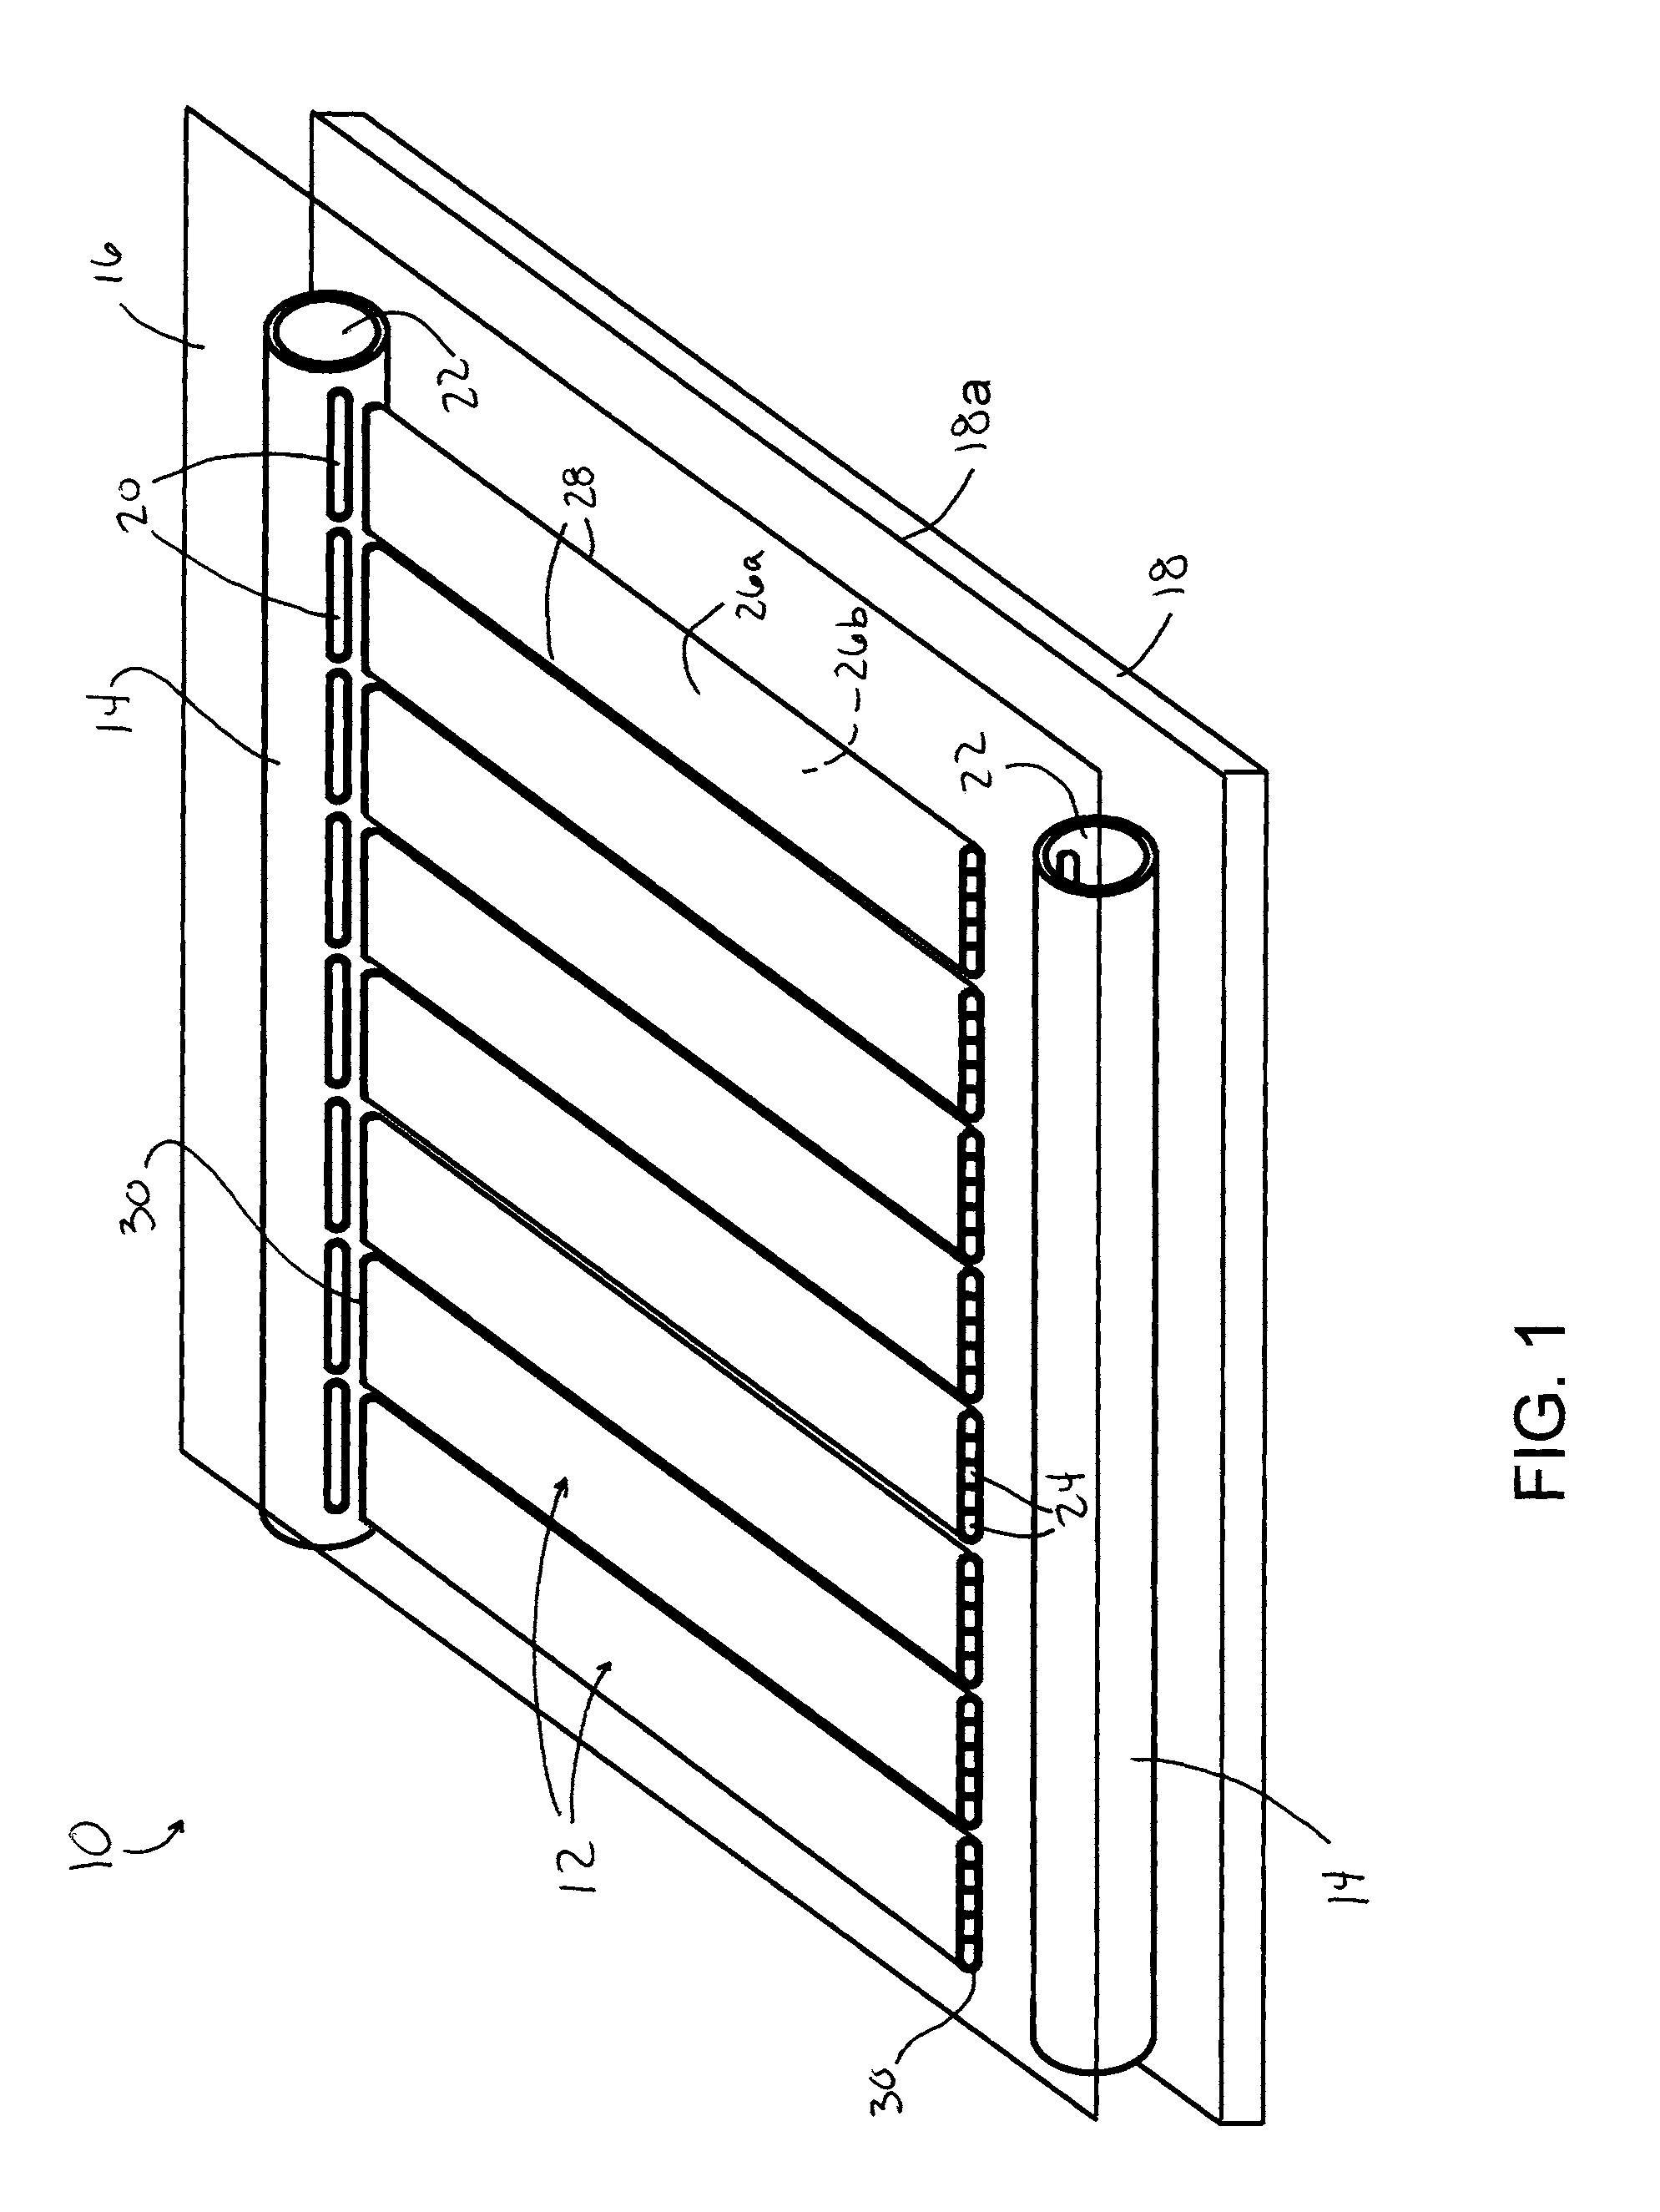 Solar energy collecting system and method